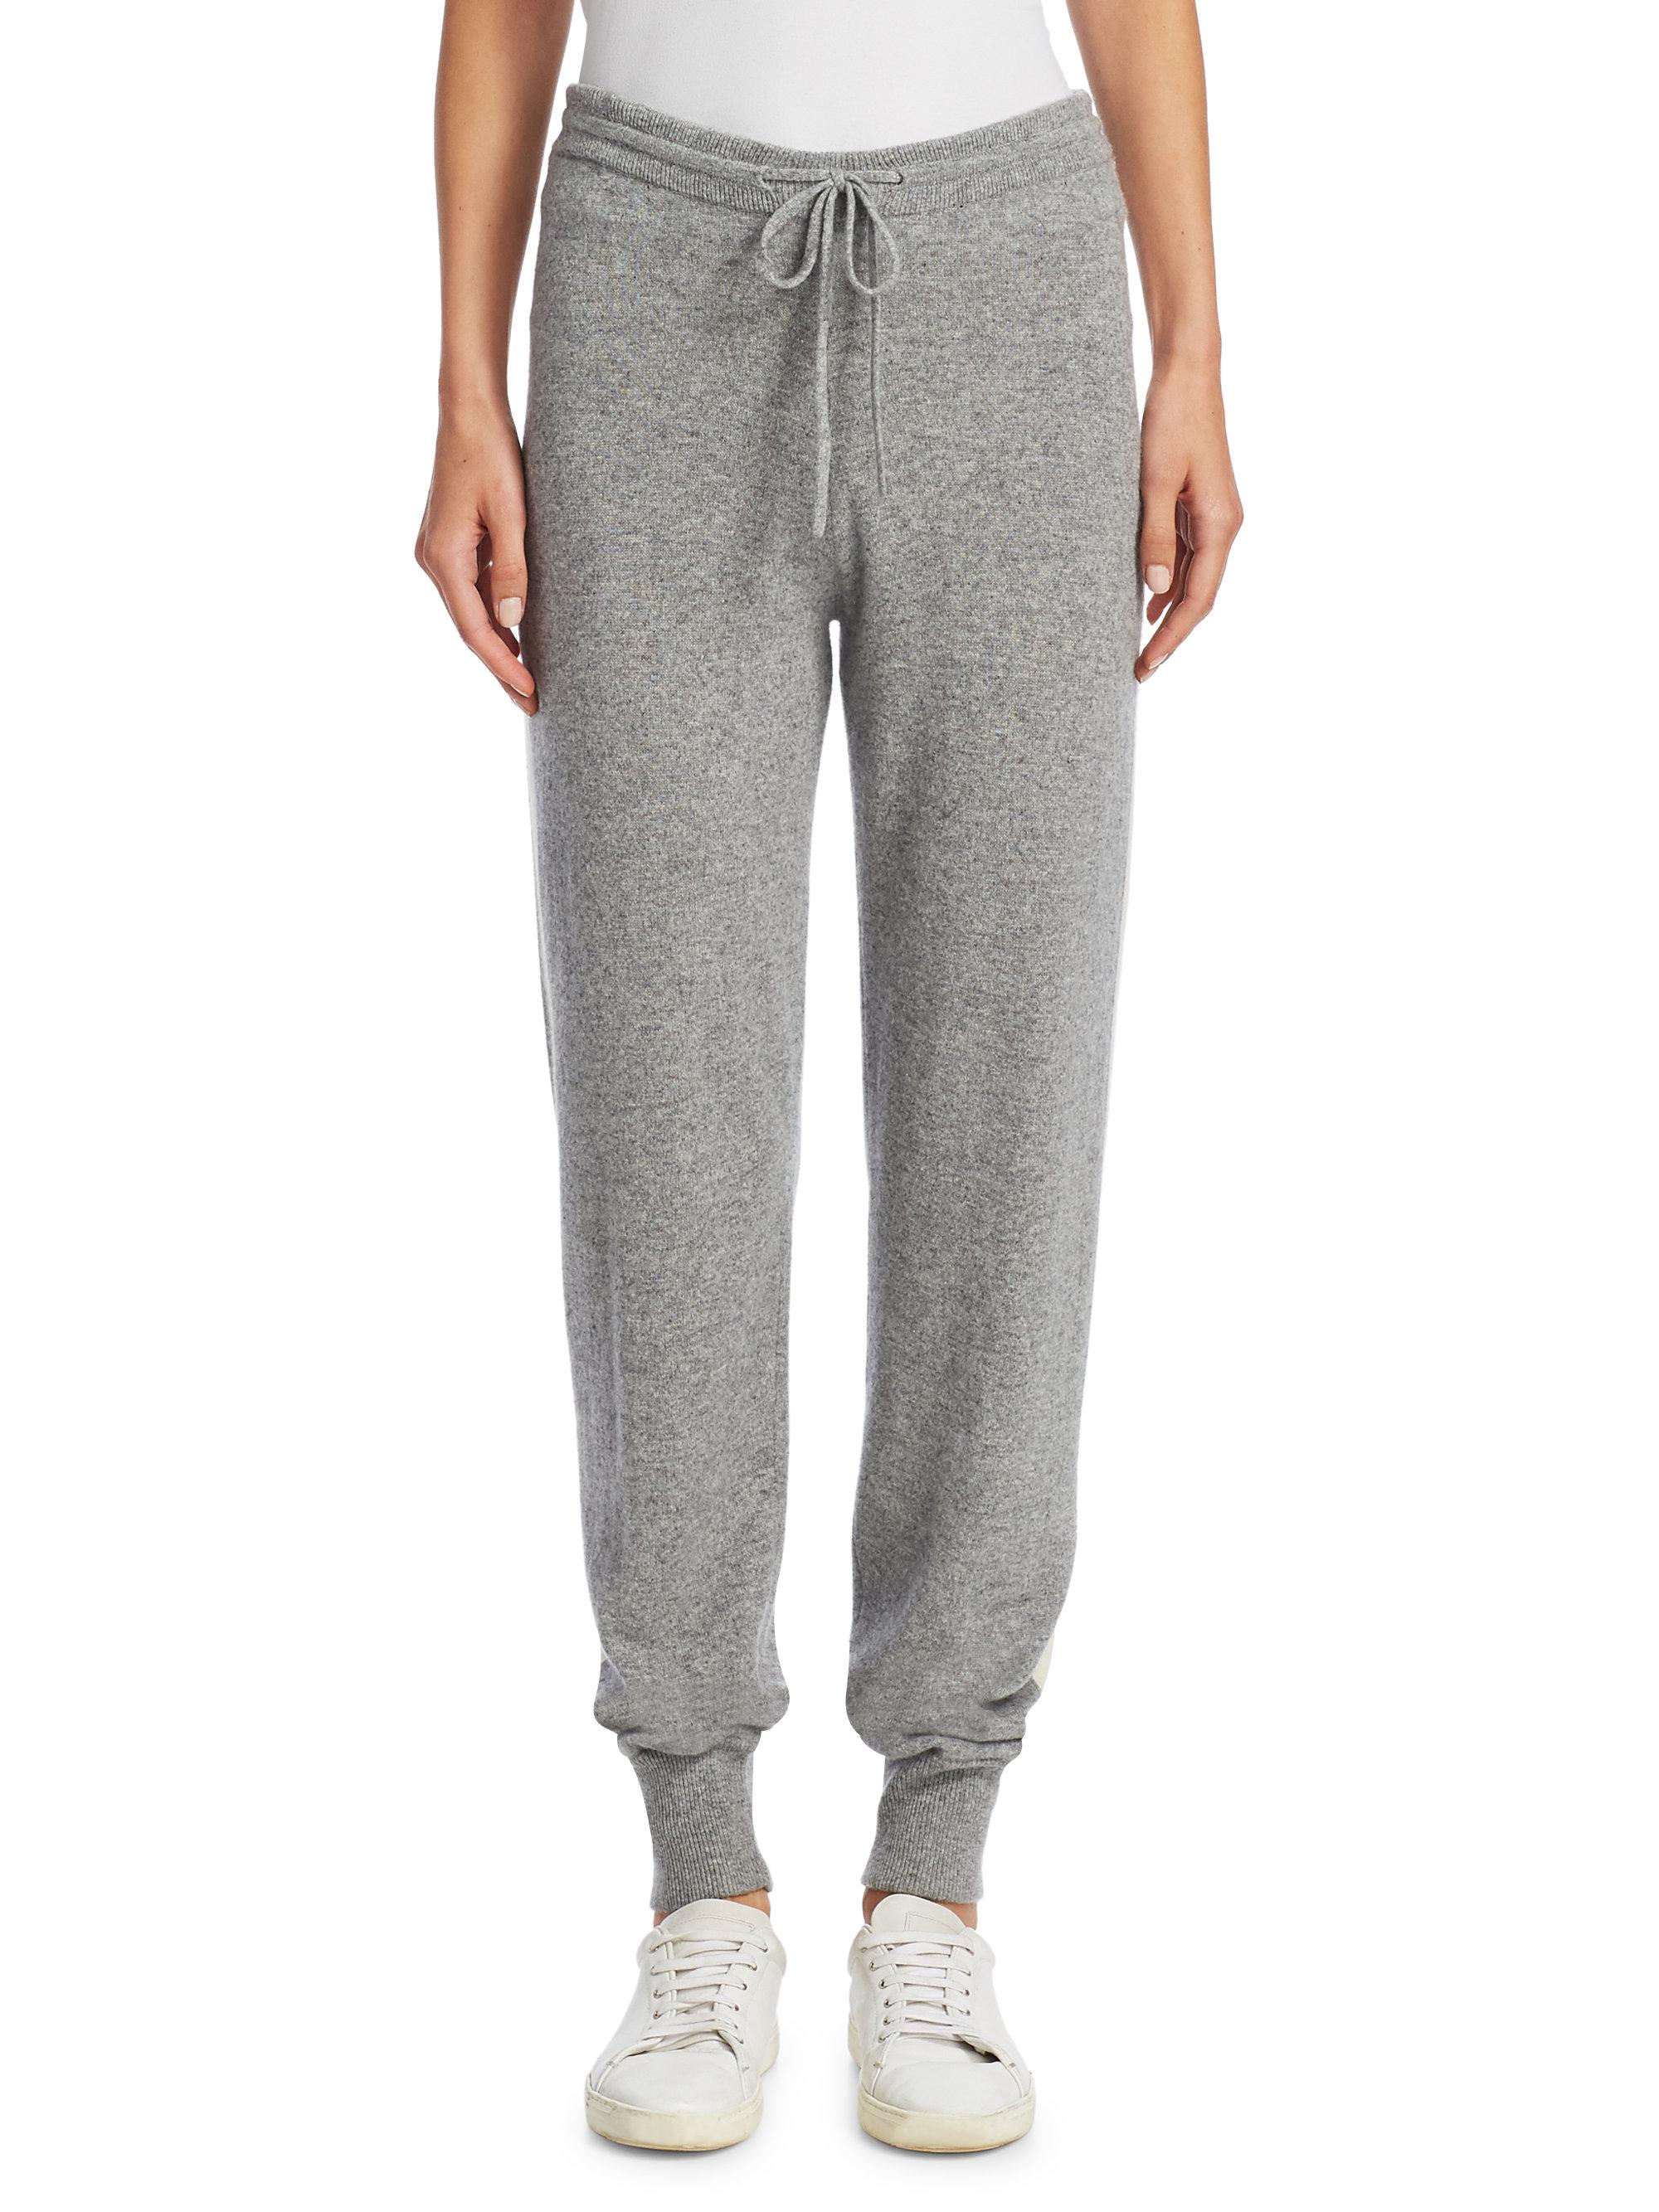 Lyst - Theory Athletic Striped Cashmere Pants in Gray